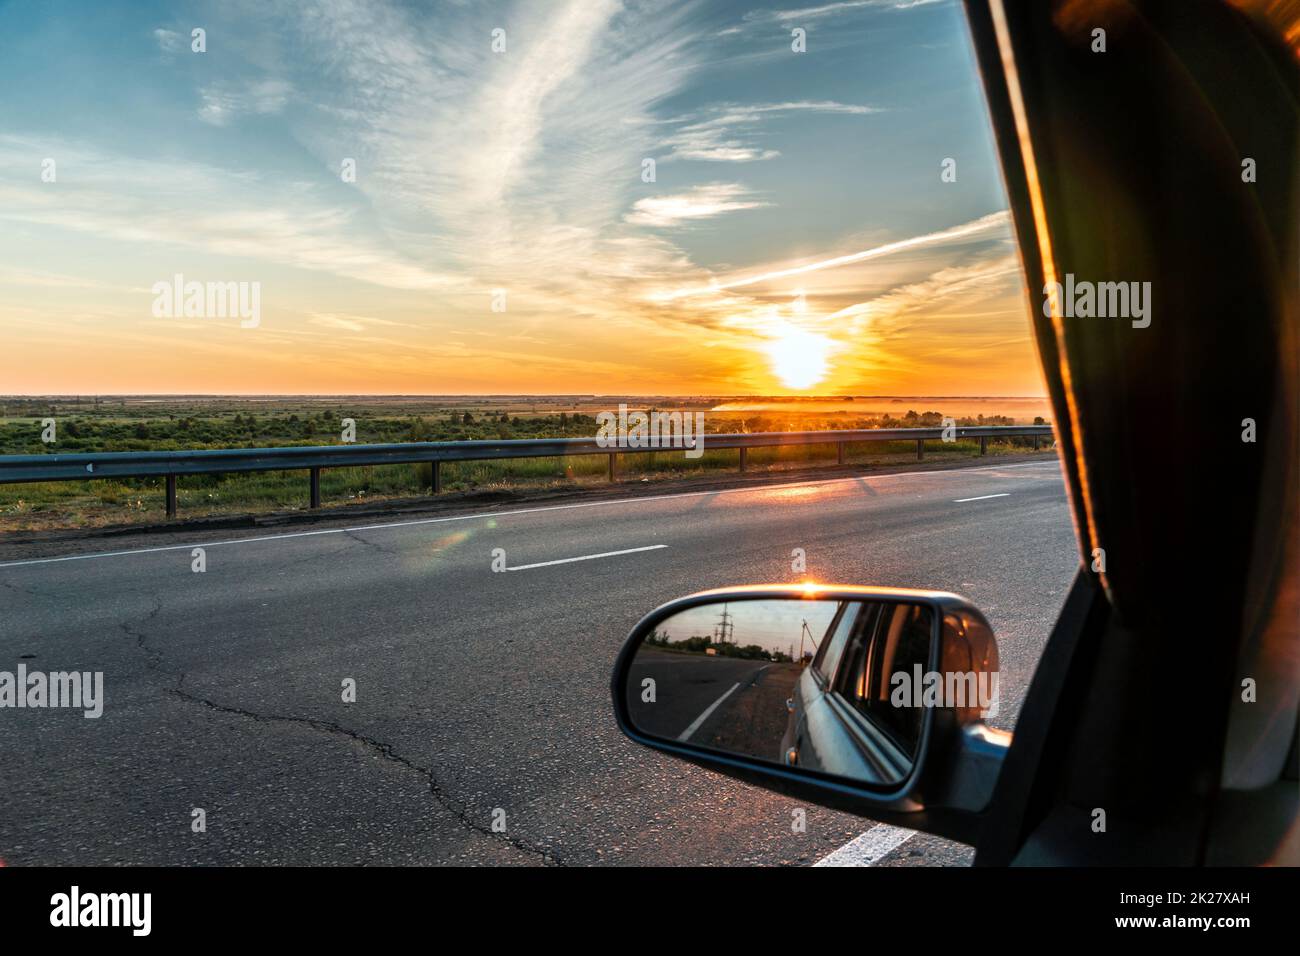 Evening trip to travel on the highway by car at sunset sunrise in the golden hour. Heavenly light.Dramatic evening sky with clouds and rays of the sun view from the window.Panoramic view of clouds Stock Photo